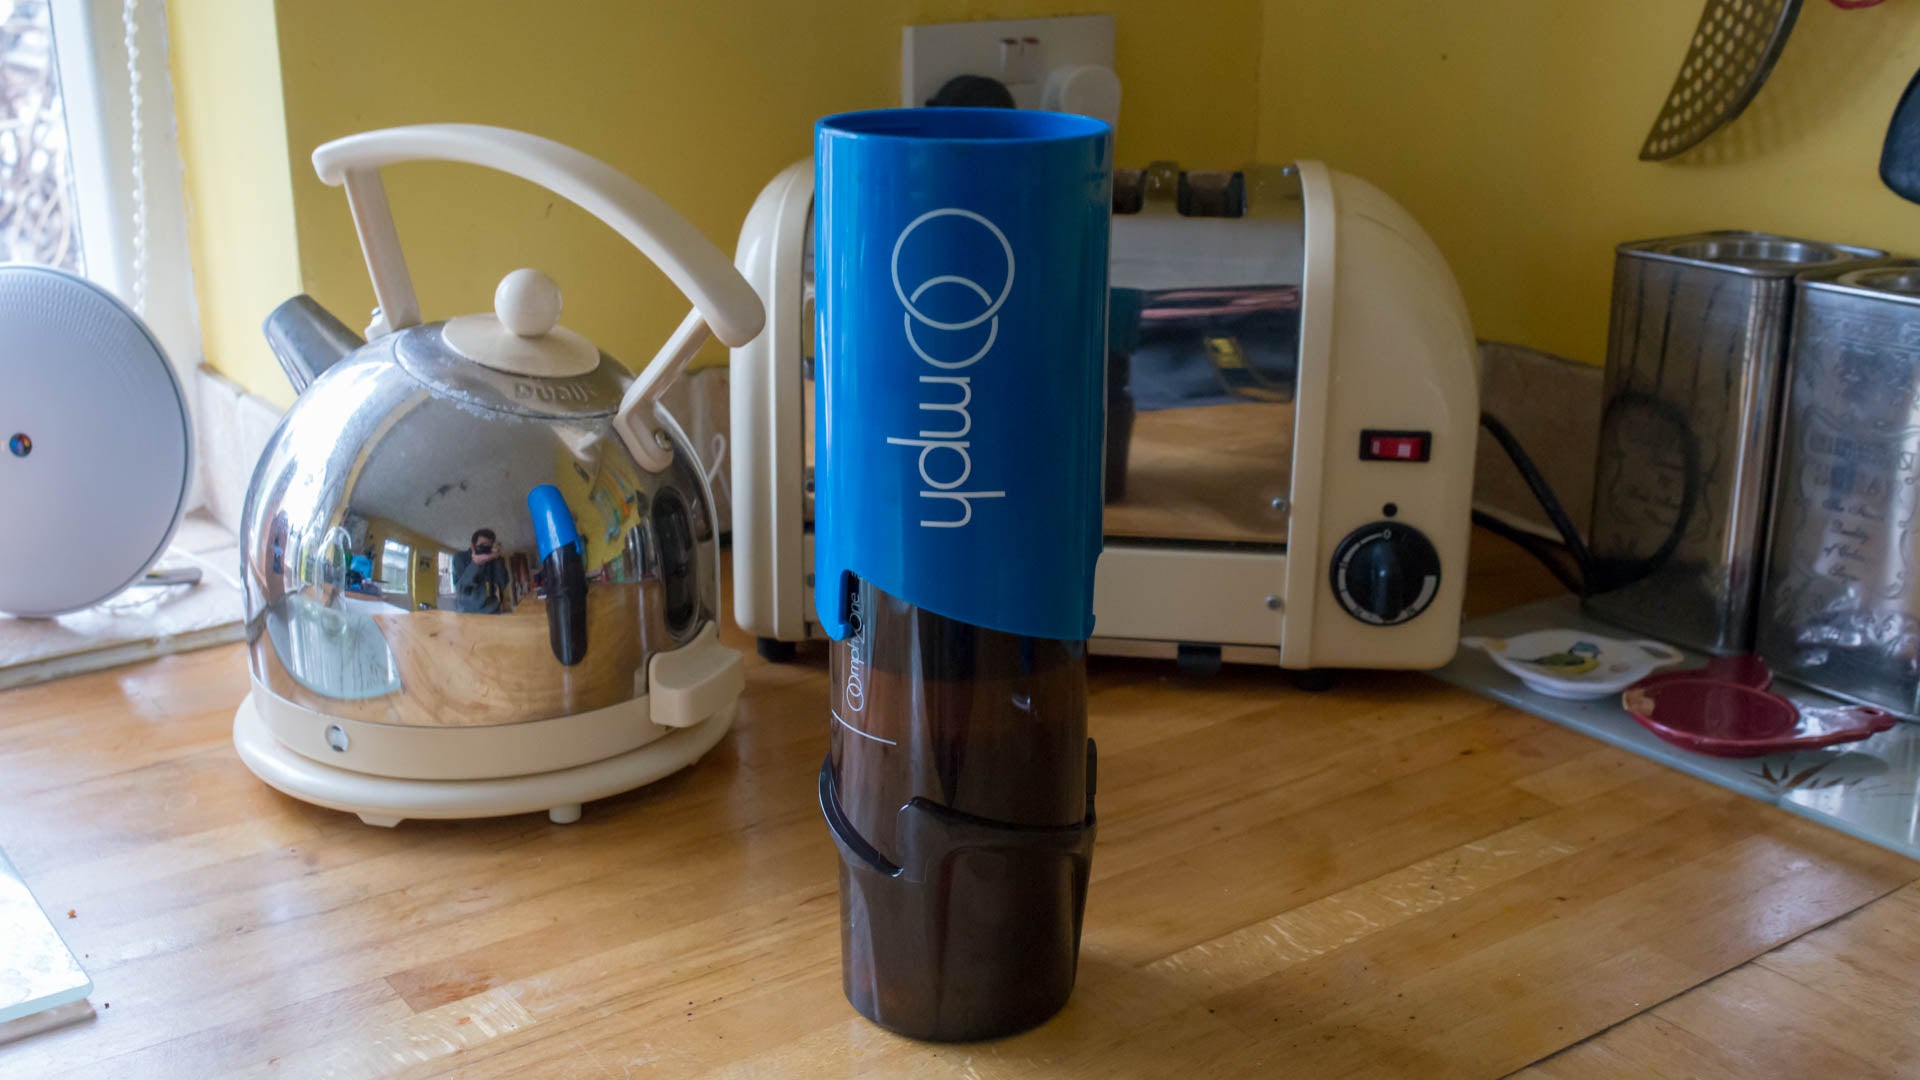 Oomph Coffee Maker on kitchen counter next to kettle.